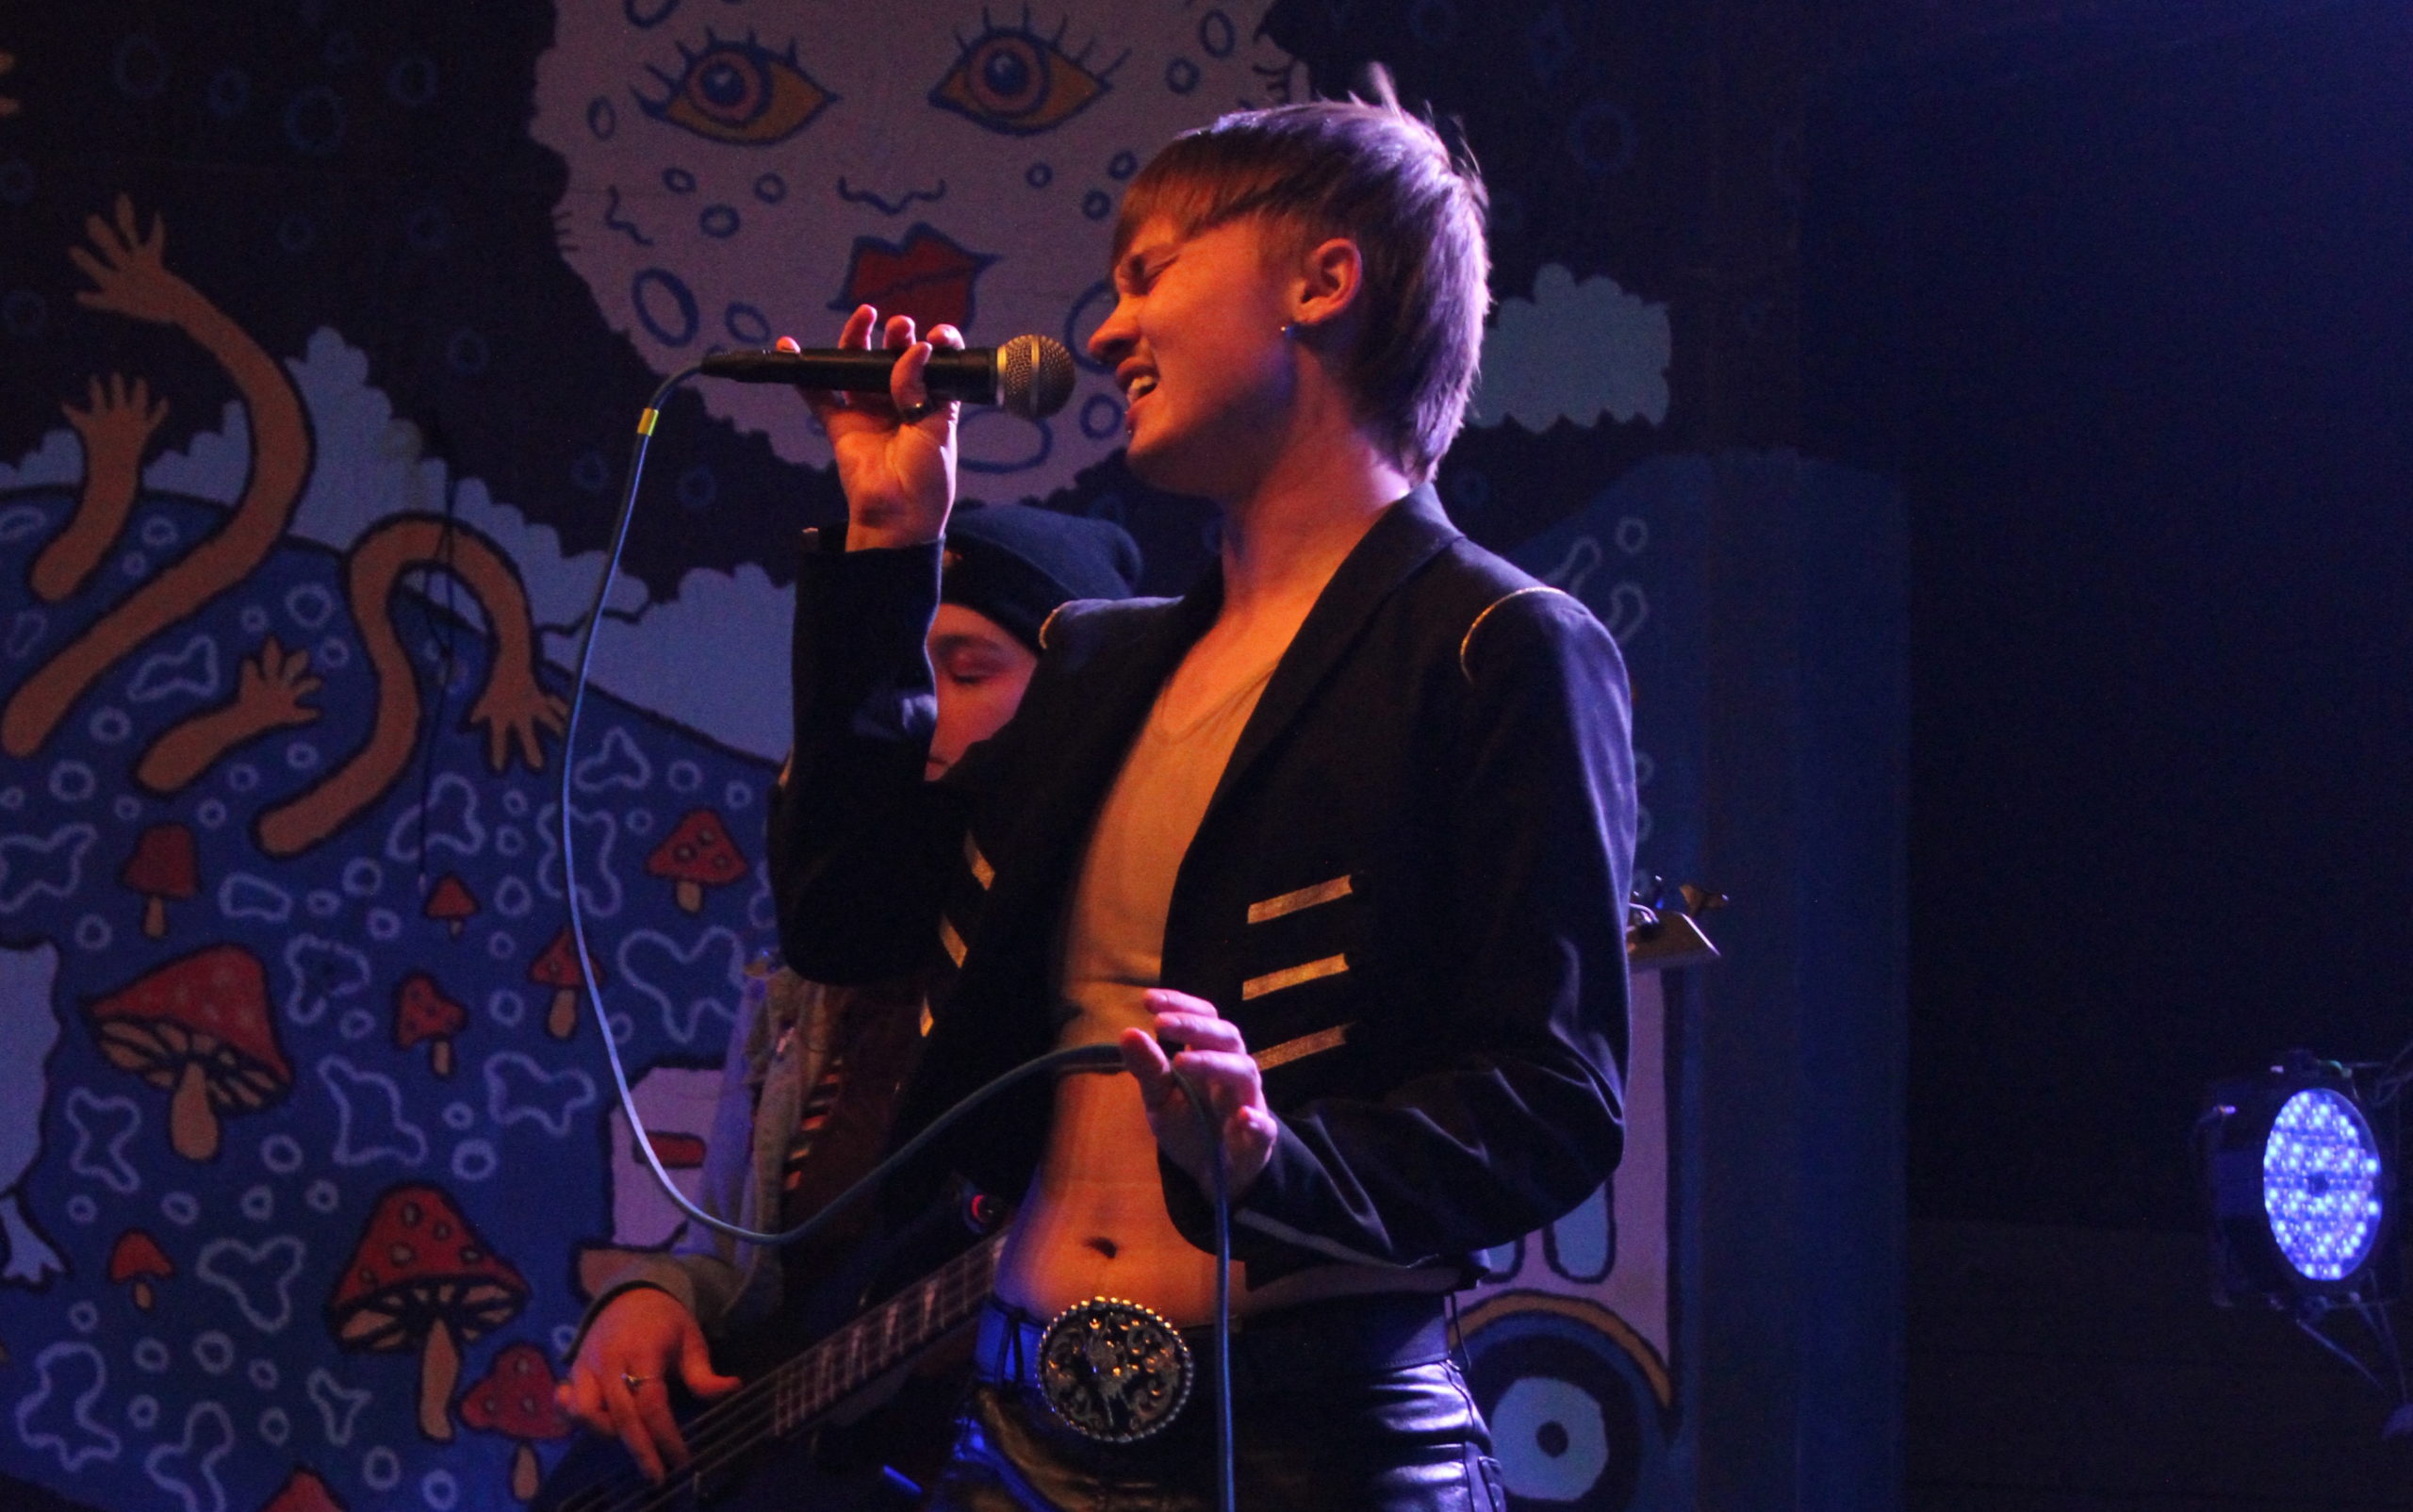 Bowie Brae strikes a dramatic pose with the microphone as he performs with his band Nip Slip at Trans Pride Fest. He's wearing an open jacket with diagonal golden stripes on dark fabric, over a beige crop top, along with a belt with a huge belt buckle.